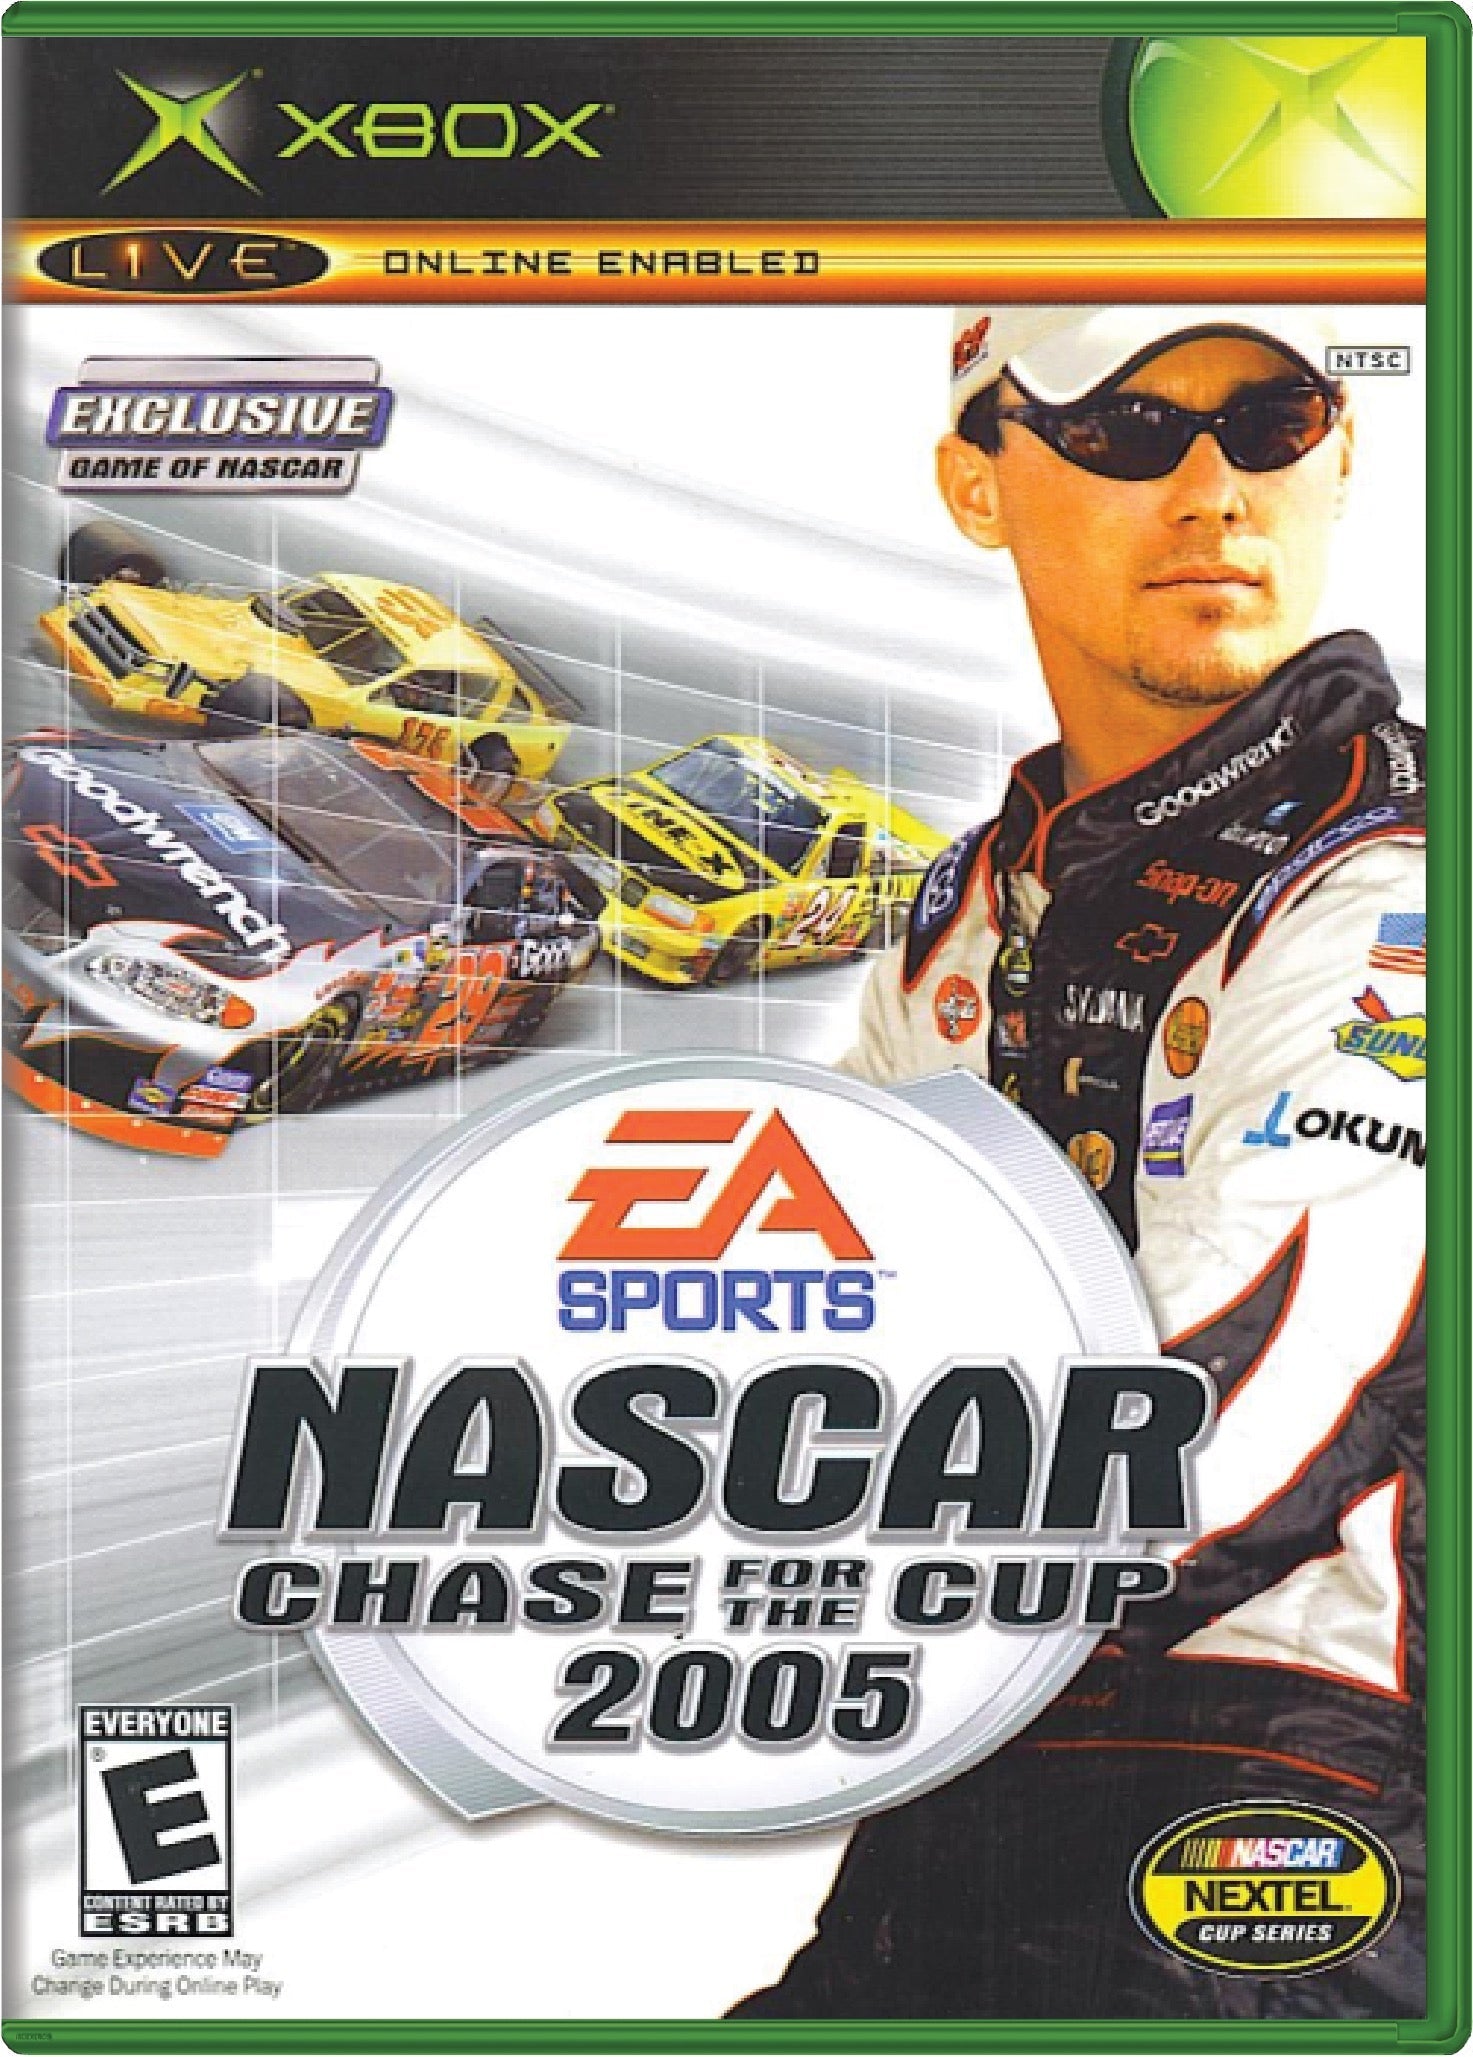 NASCAR Chase for the Cup 2005 Cover Art